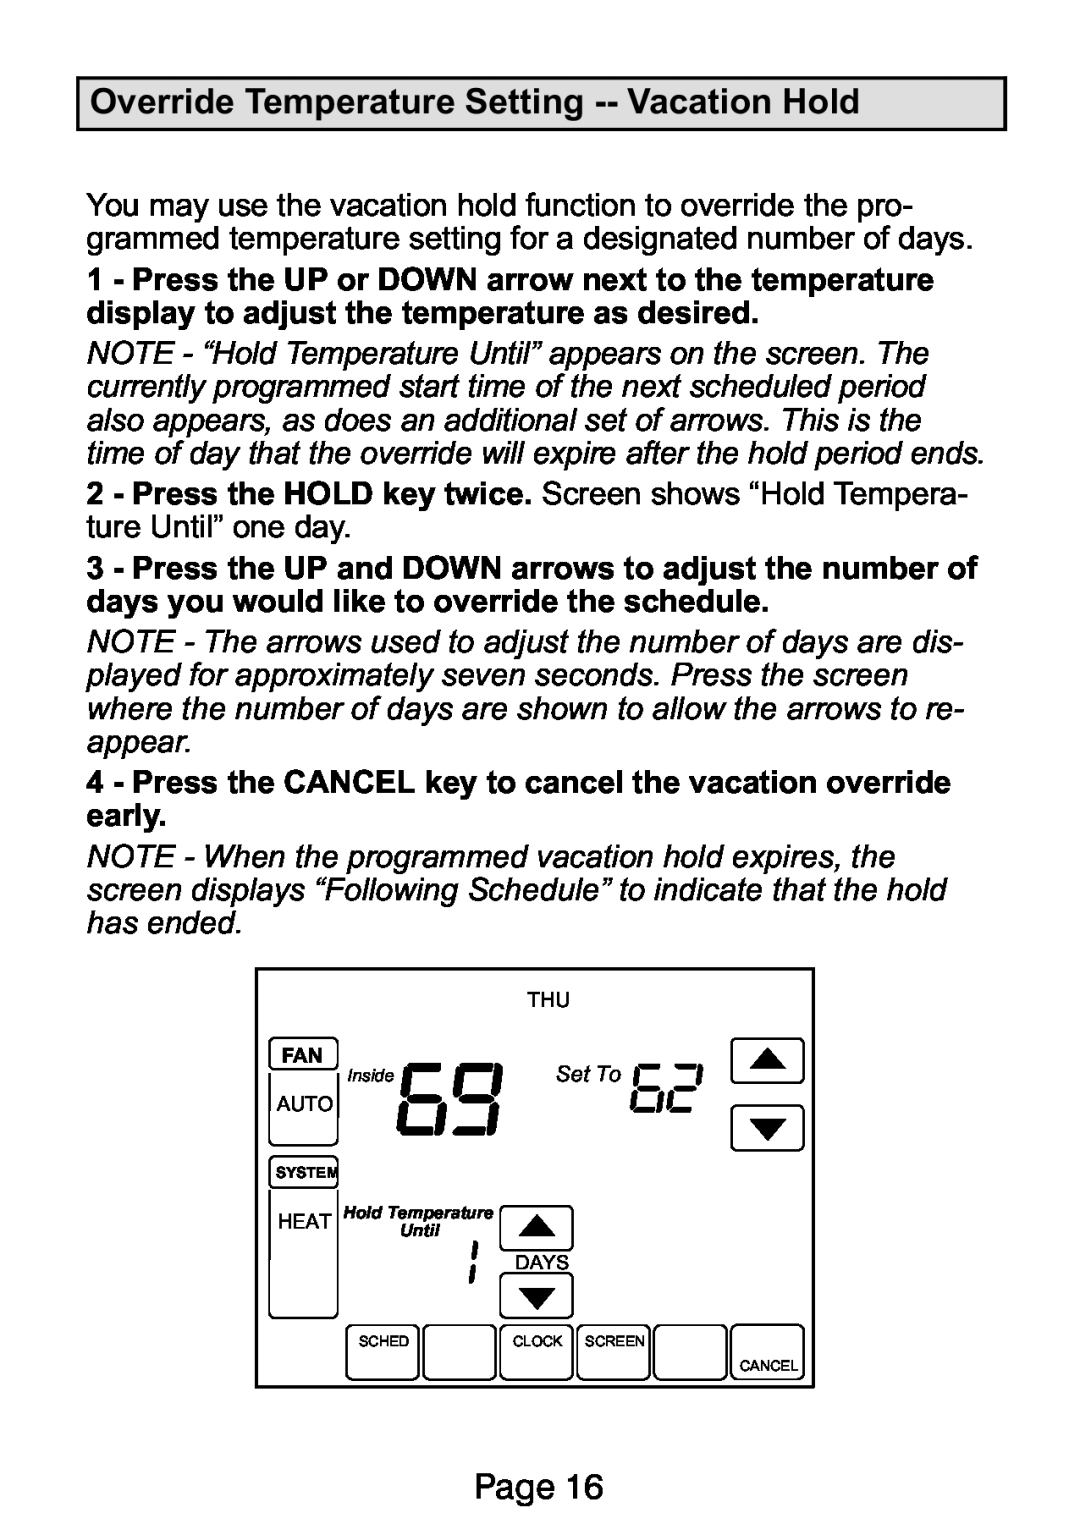 Lennox International Inc Ellite Series manual Override Temperature Setting −− Vacation Hold, Page 